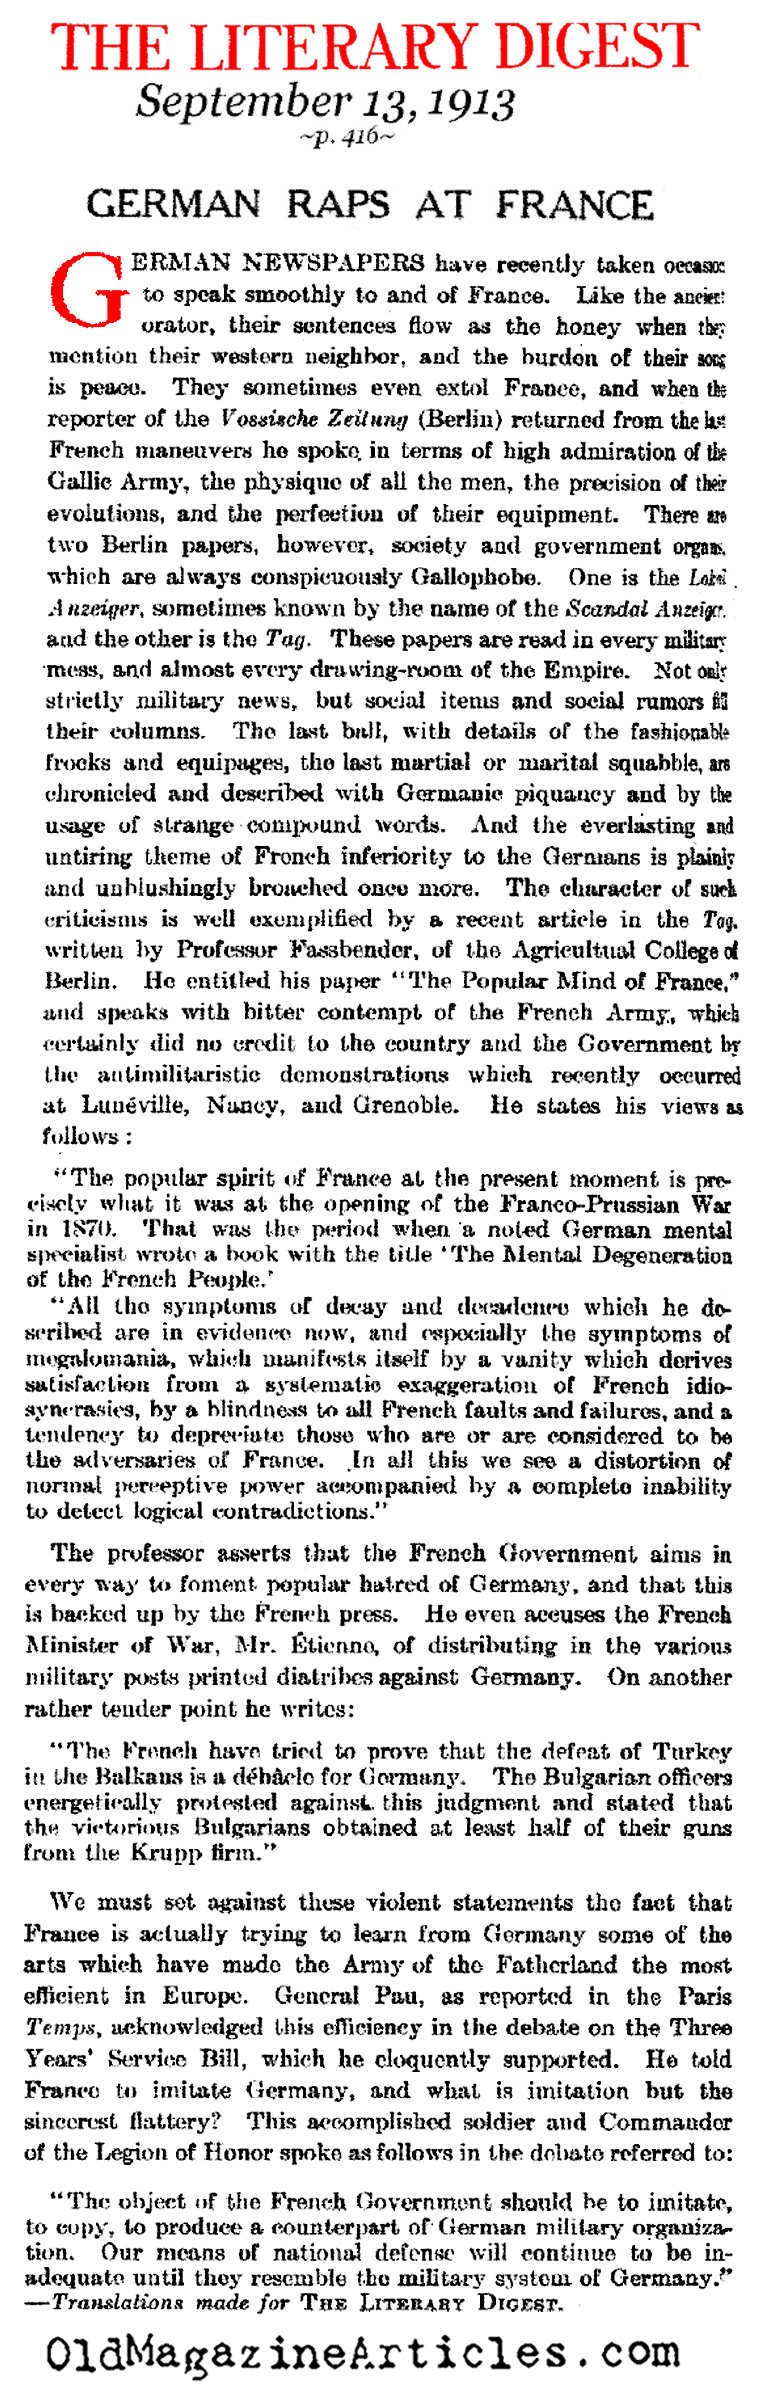 French Insecurity in the Face of German Might (Literary Digest, 1913)